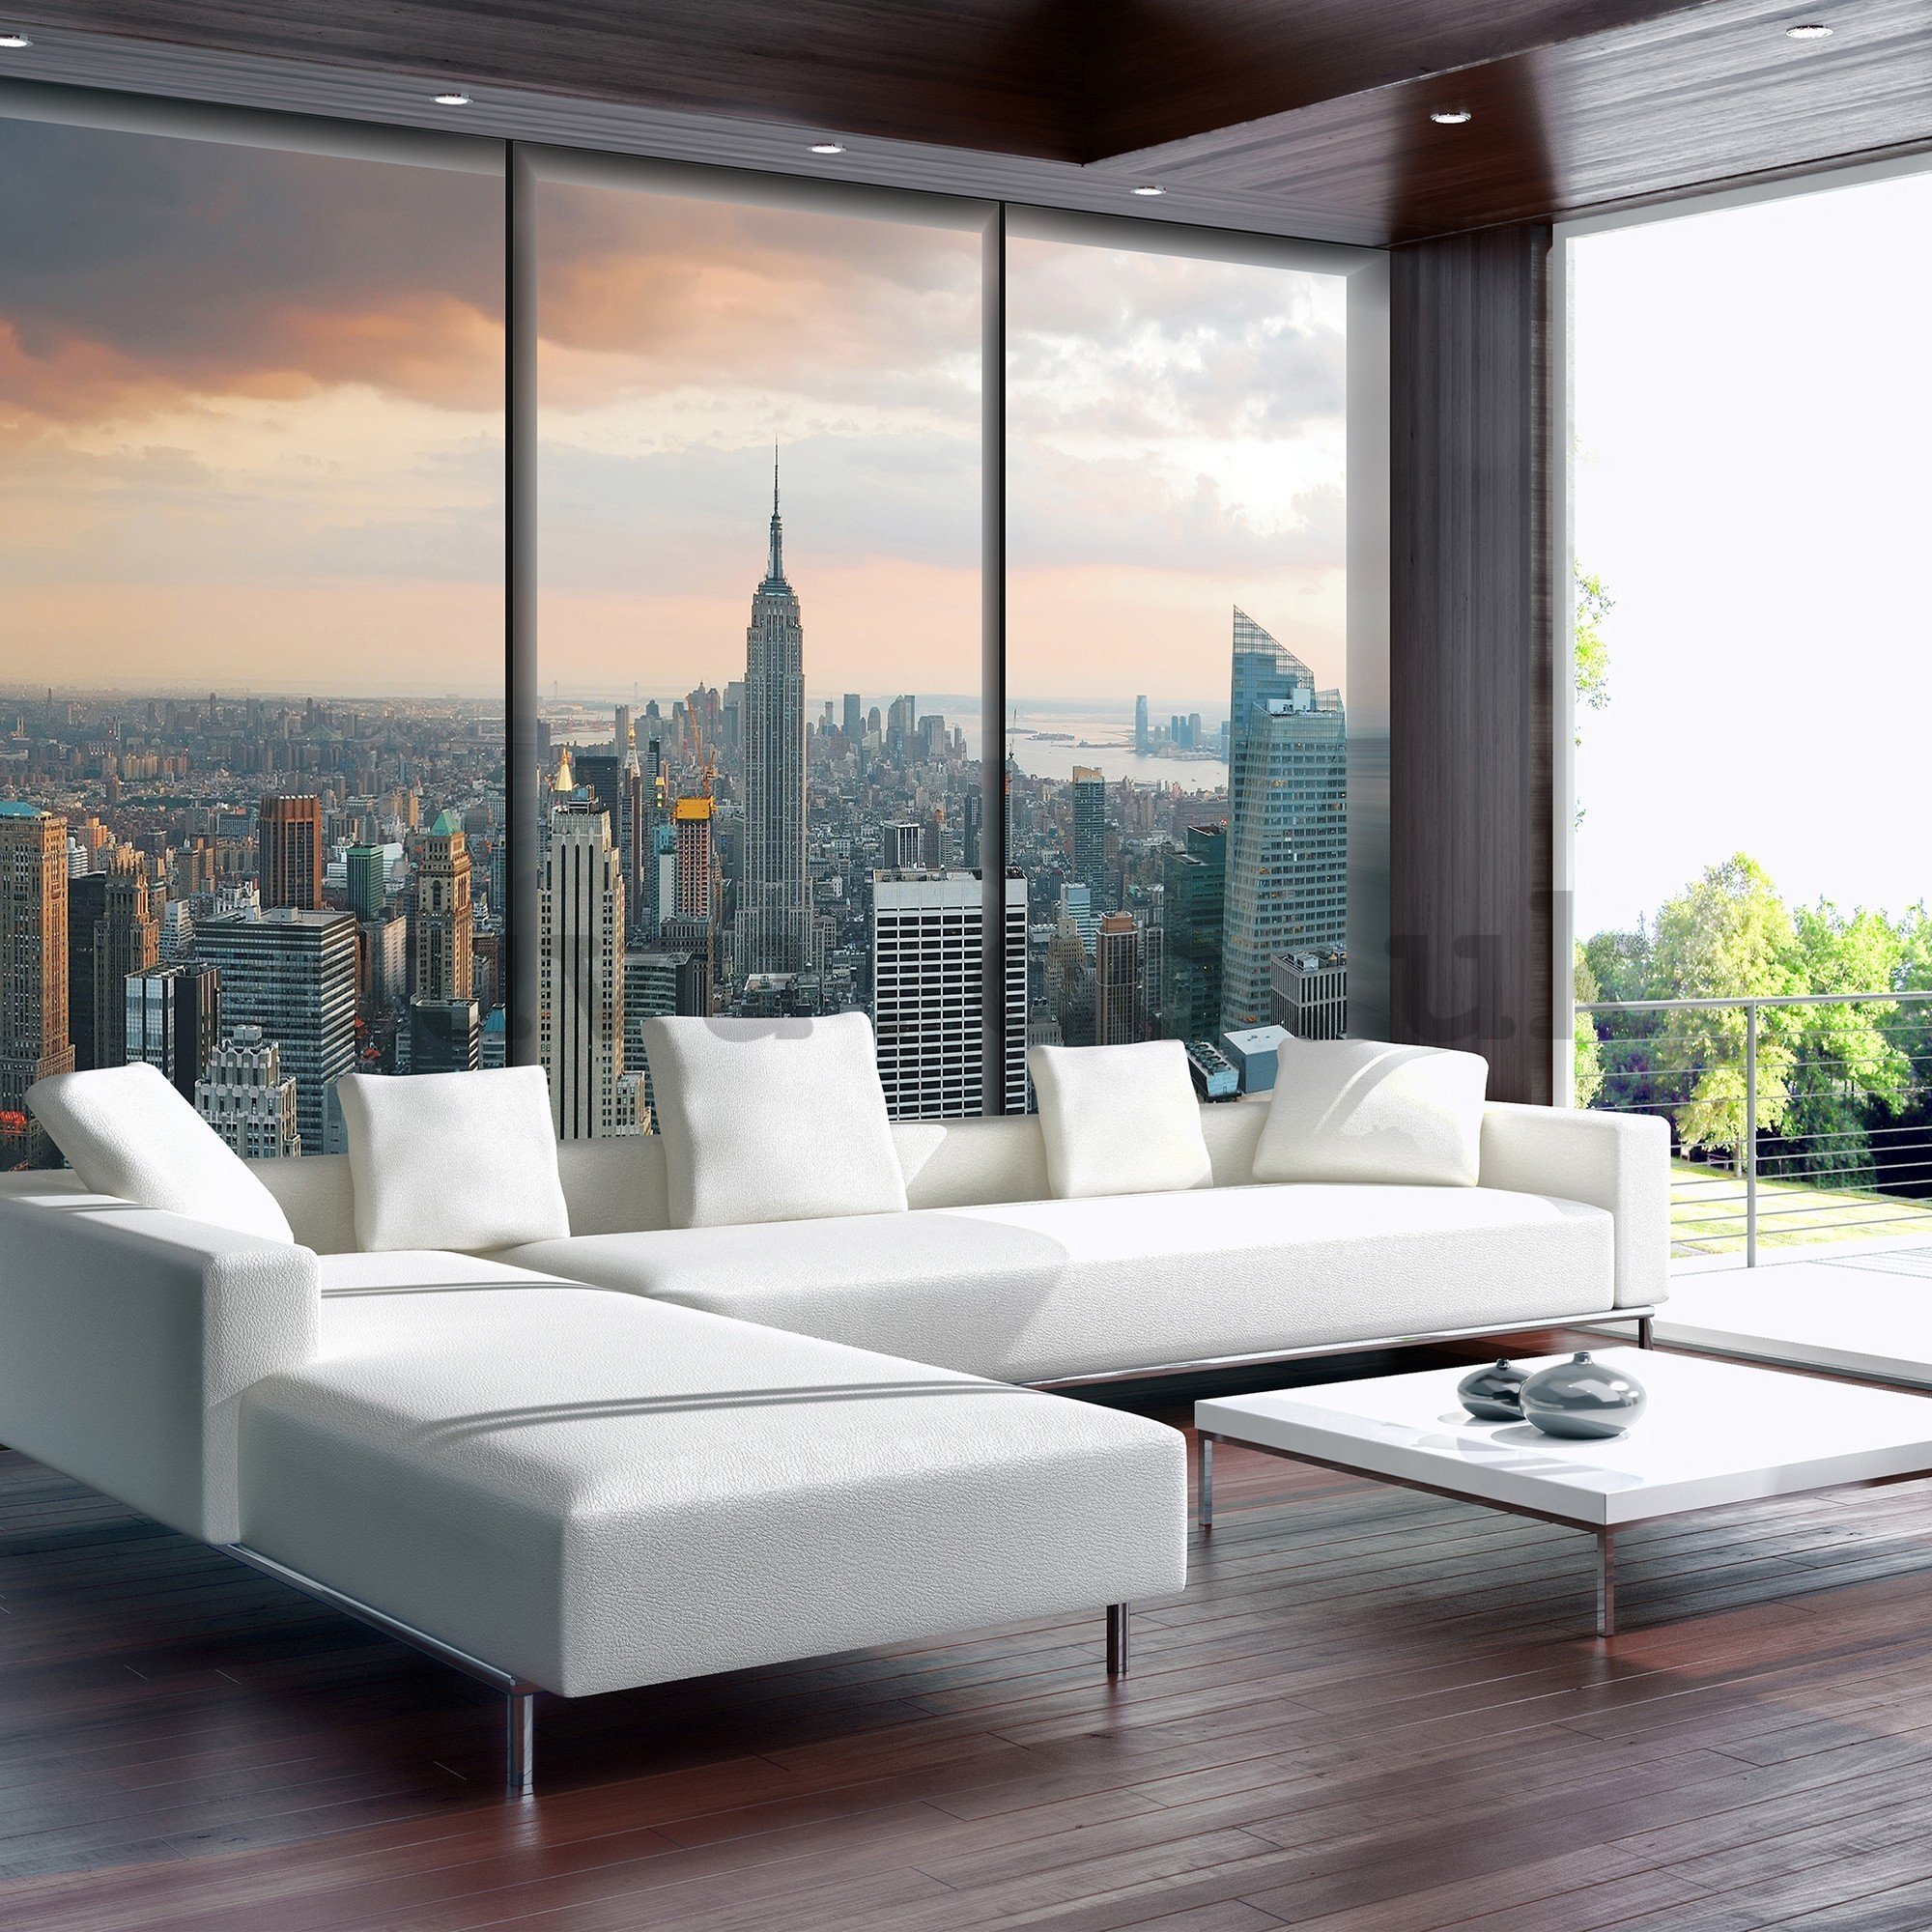 Wall mural vlies: View out of the window of Manhattan - 416x254 cm